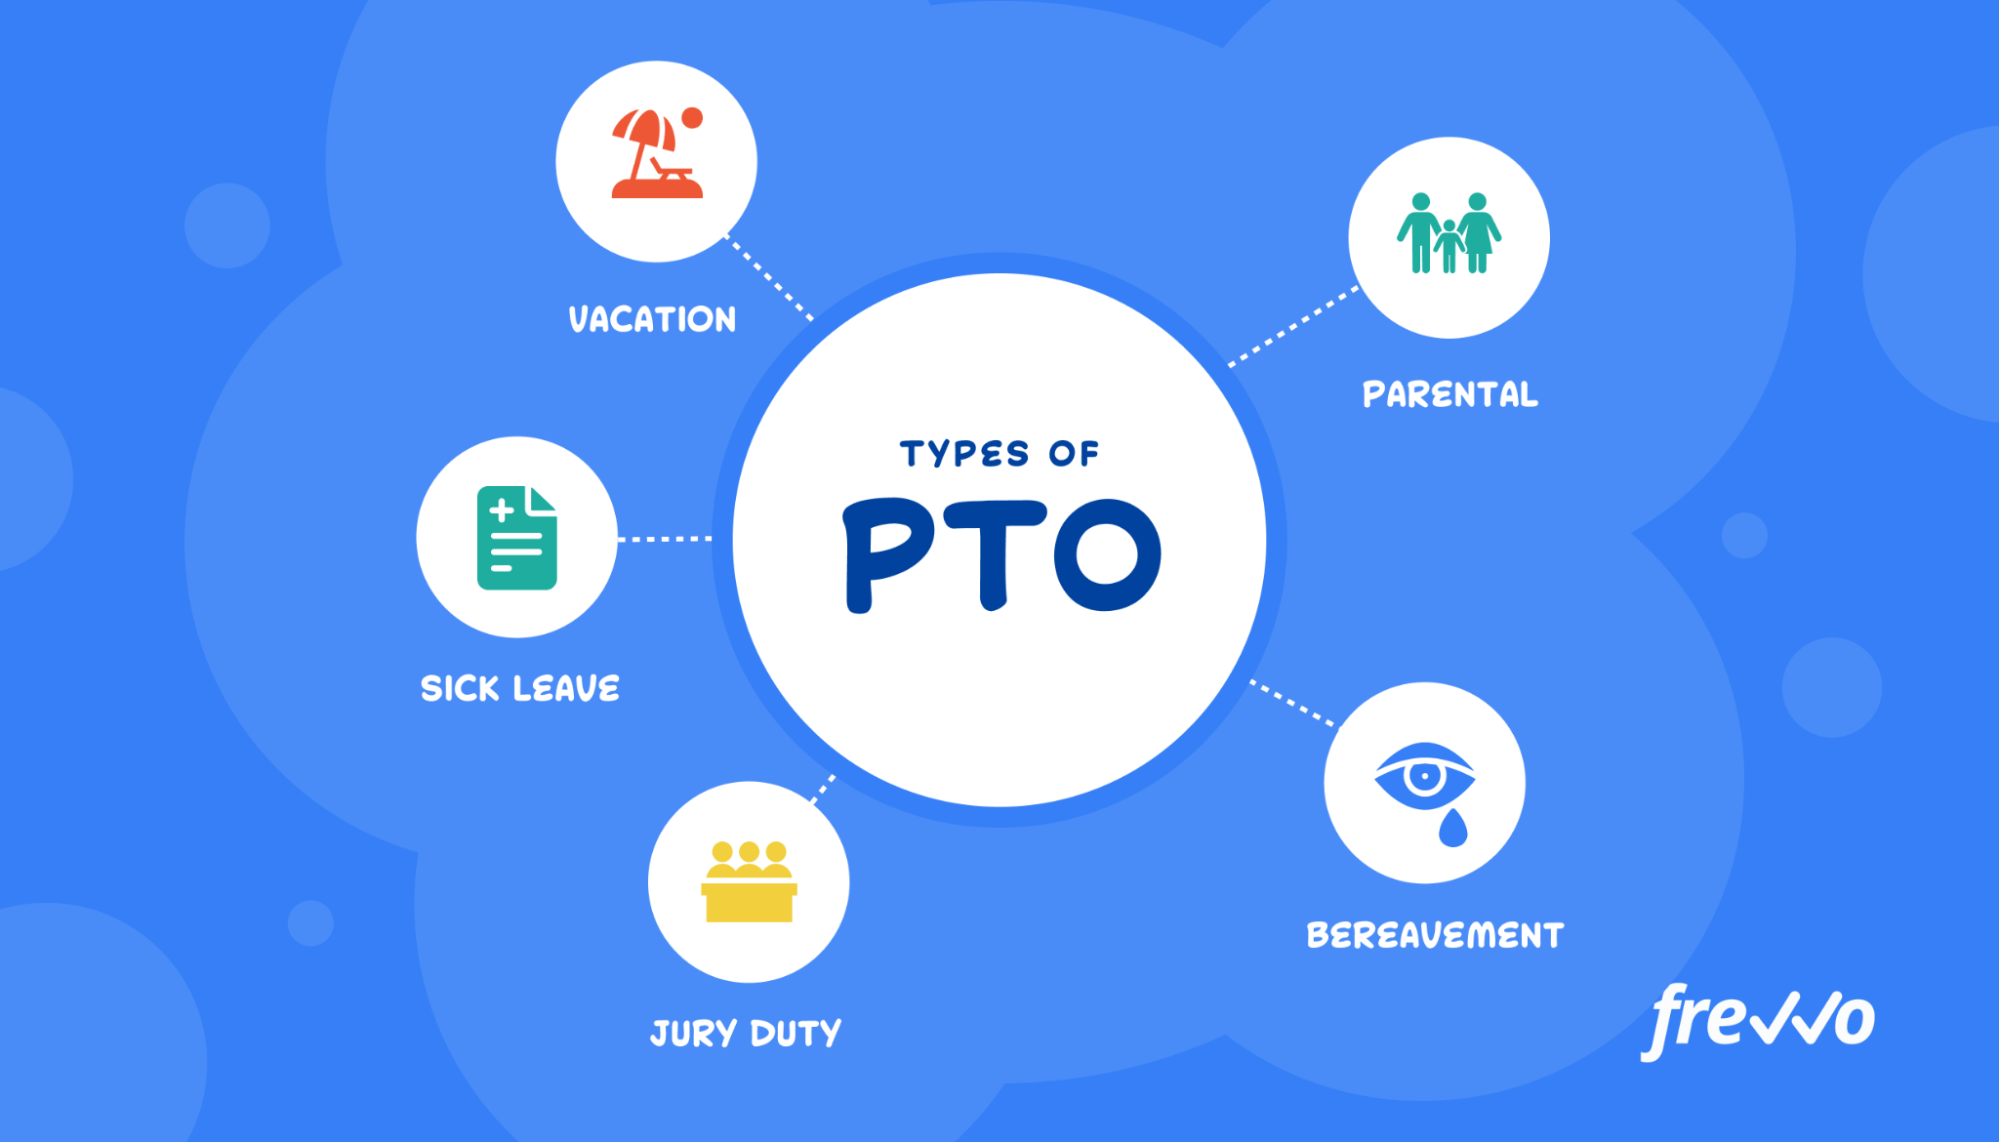 Icons representing different types of PTO, including sick leave, vacation, jury duty, bereavement, parental